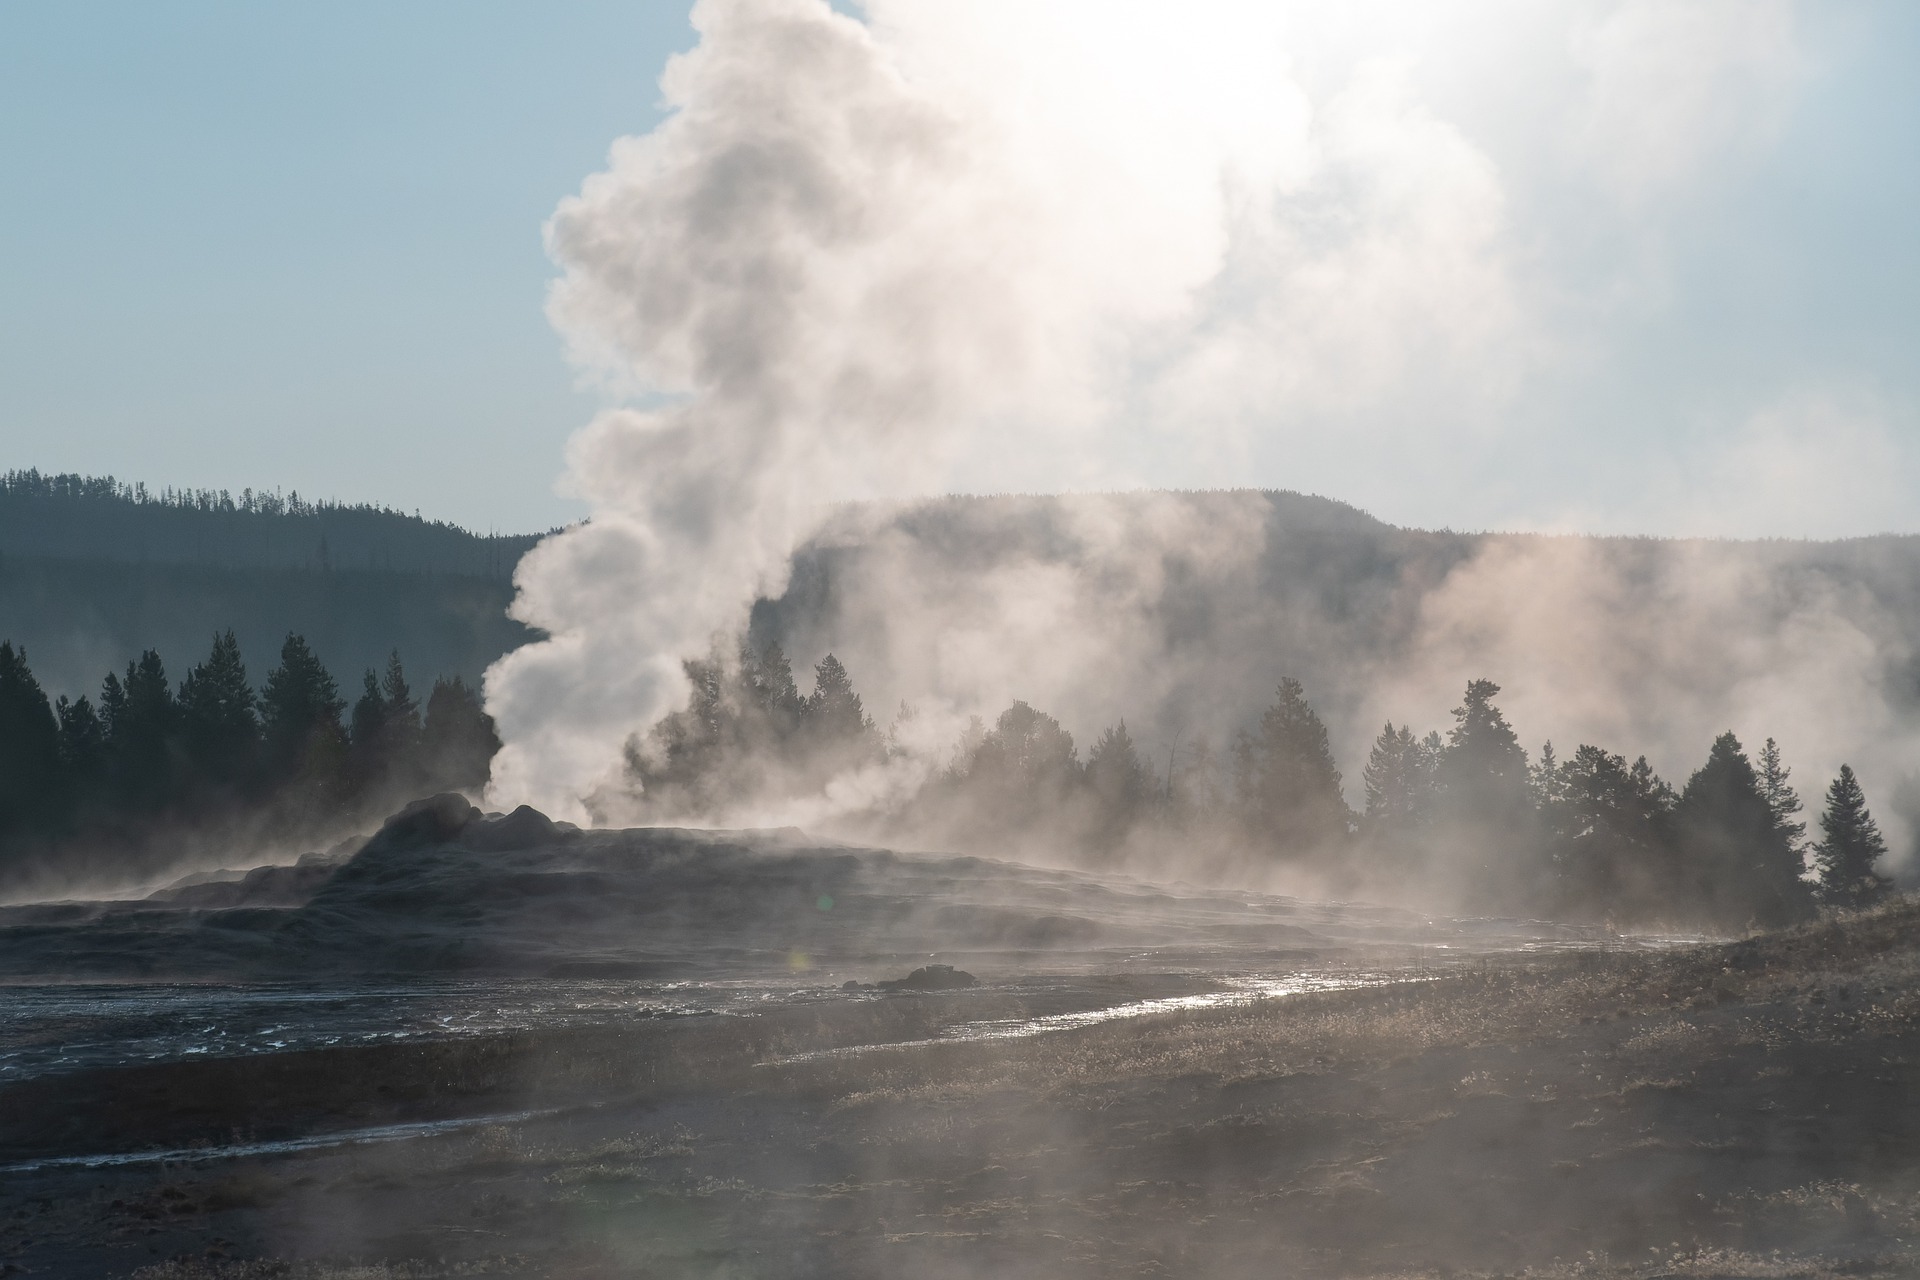 YNP geothermal feature